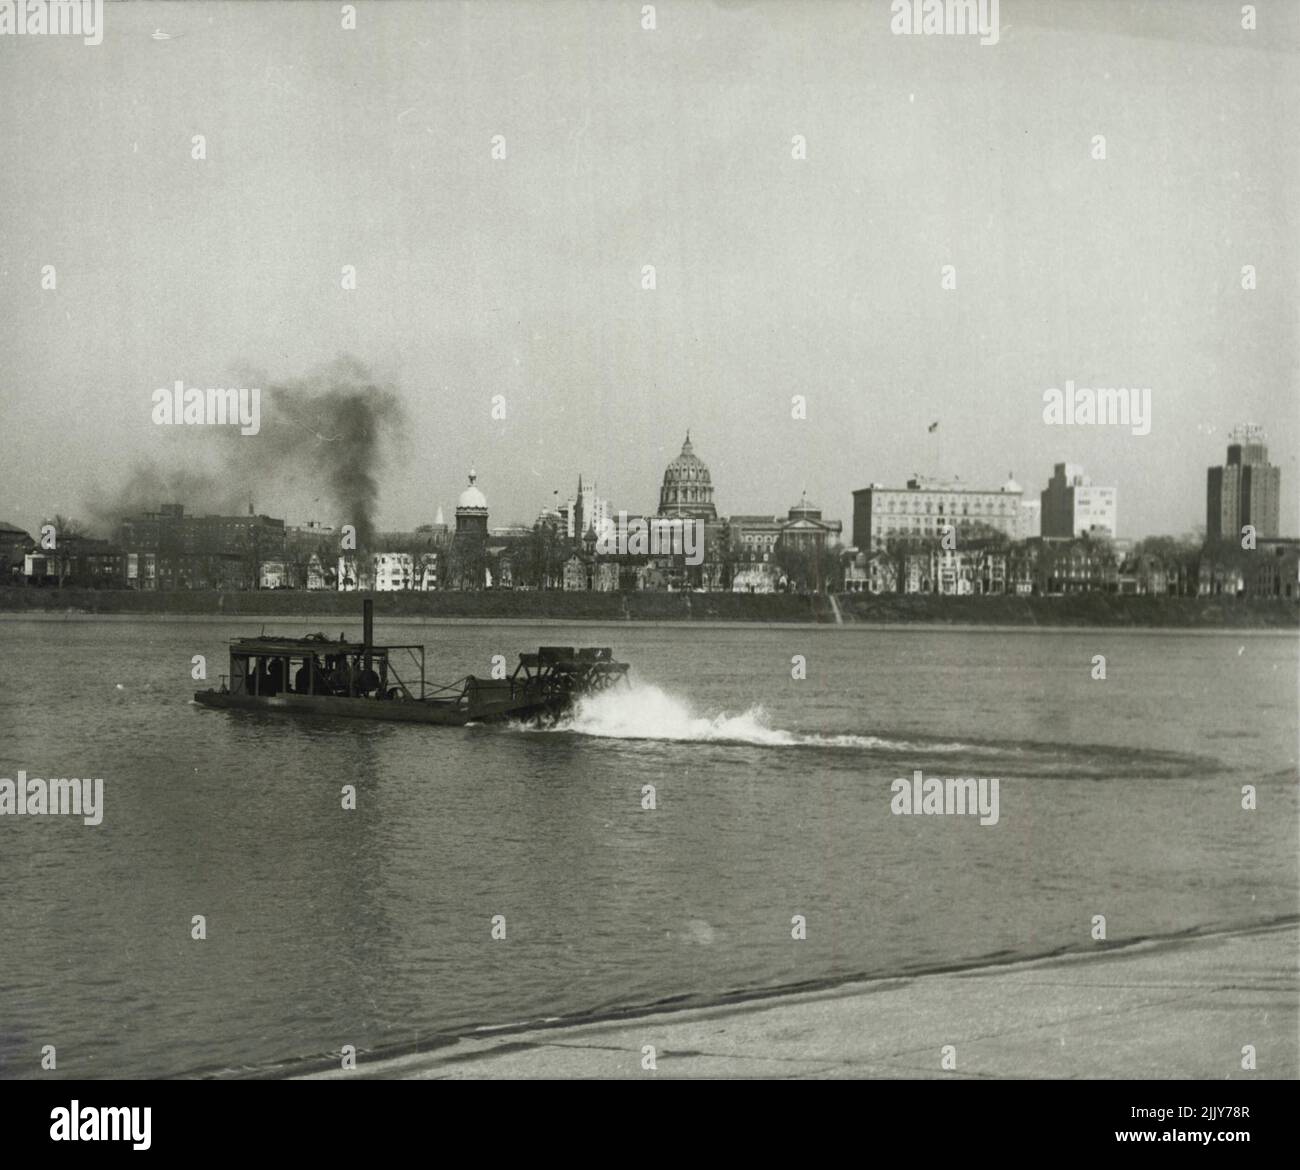 End of an Era - Framing Pennsylvania's Capitol Buildings in black smoke and white wash, a paddlewheel barge churns up the Susquehanna River, en route to the underwater coal beds that have been dredged clean of the fuel. March 26, 1954. (Photo by United Press). Stock Photo